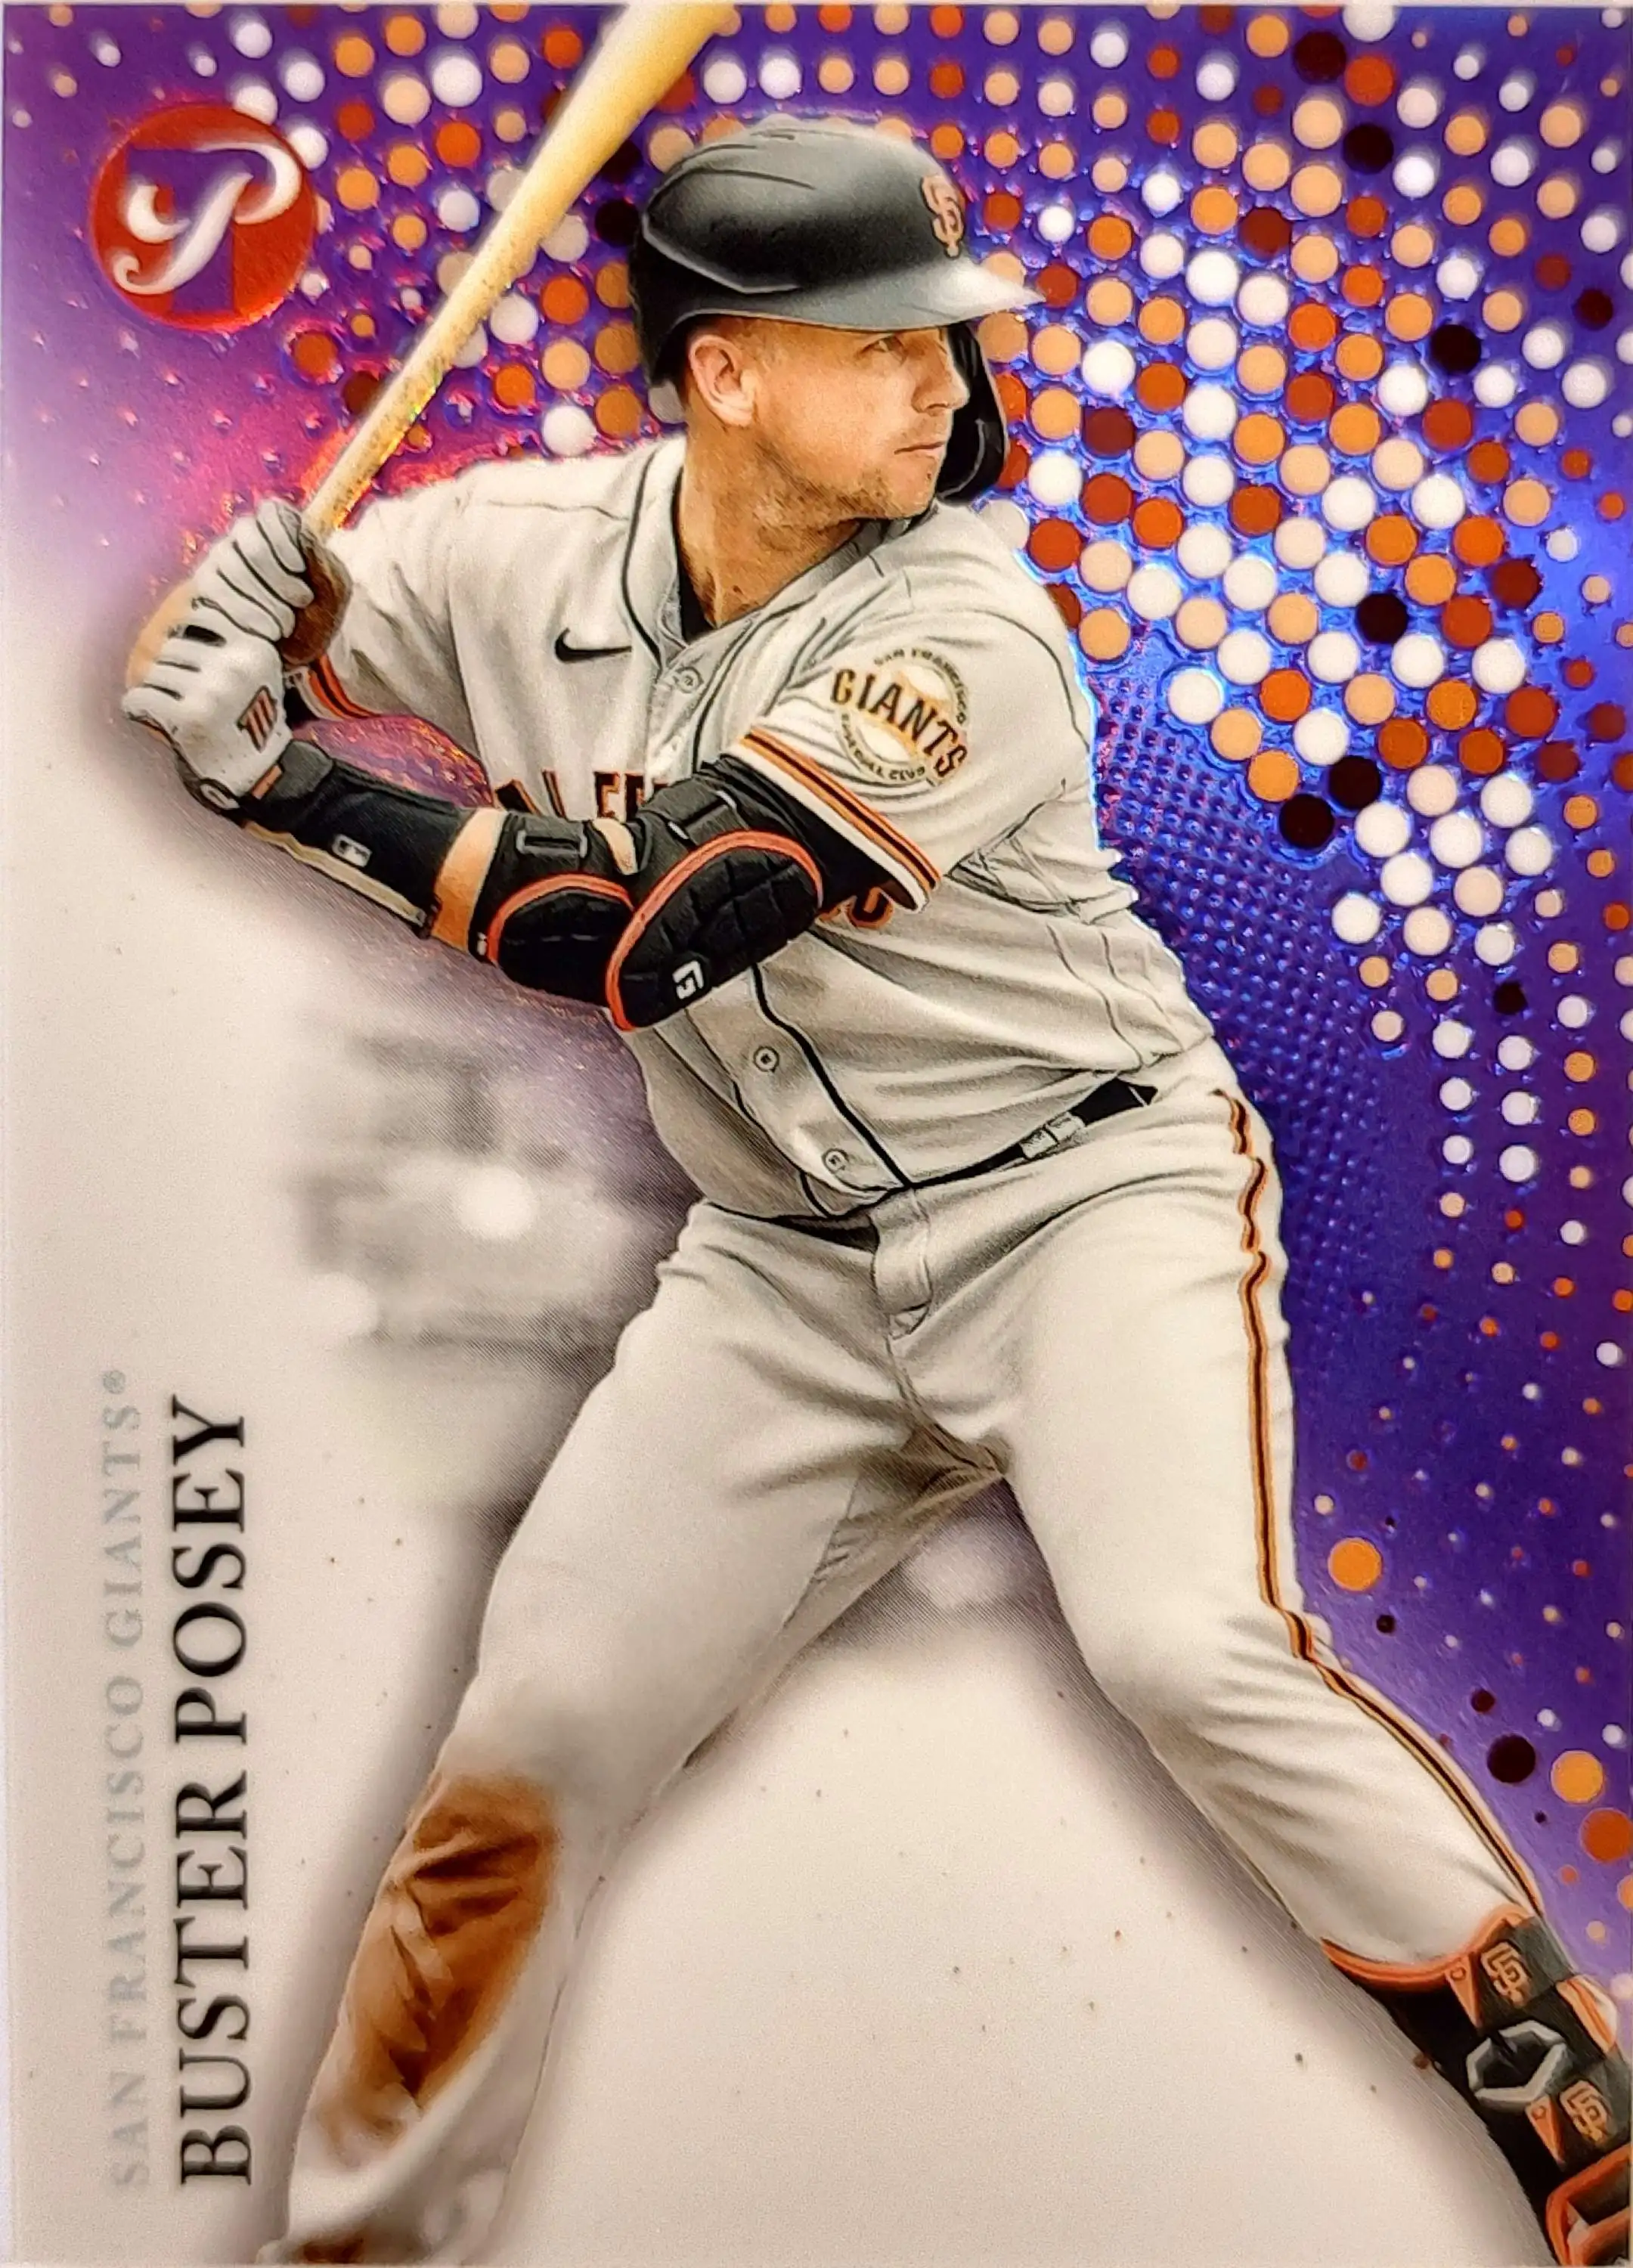 MLB 2022 Topps Pristine Buster Posey Trading Card 141 Purple, 8399